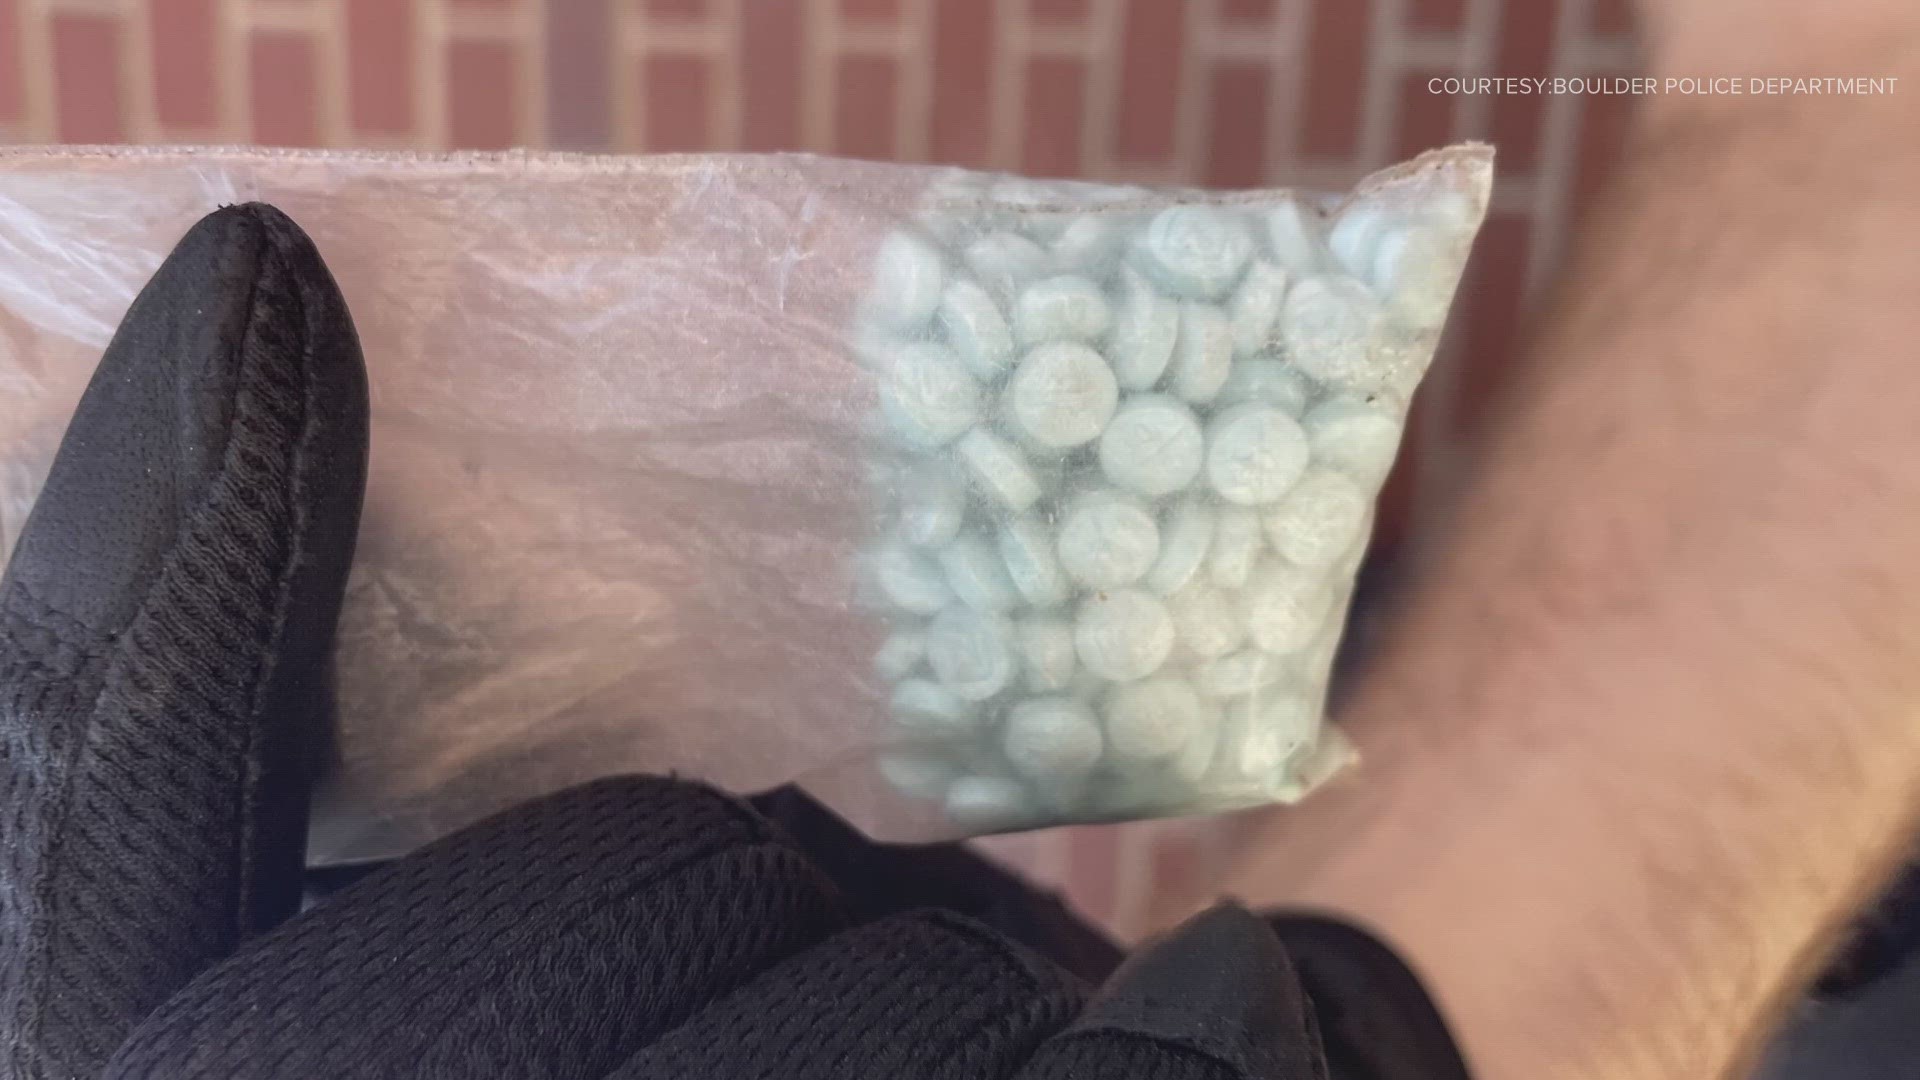 In April, Boulder Police reported five overdoses within 36 hours. Last week, two women overdosed within one hour.